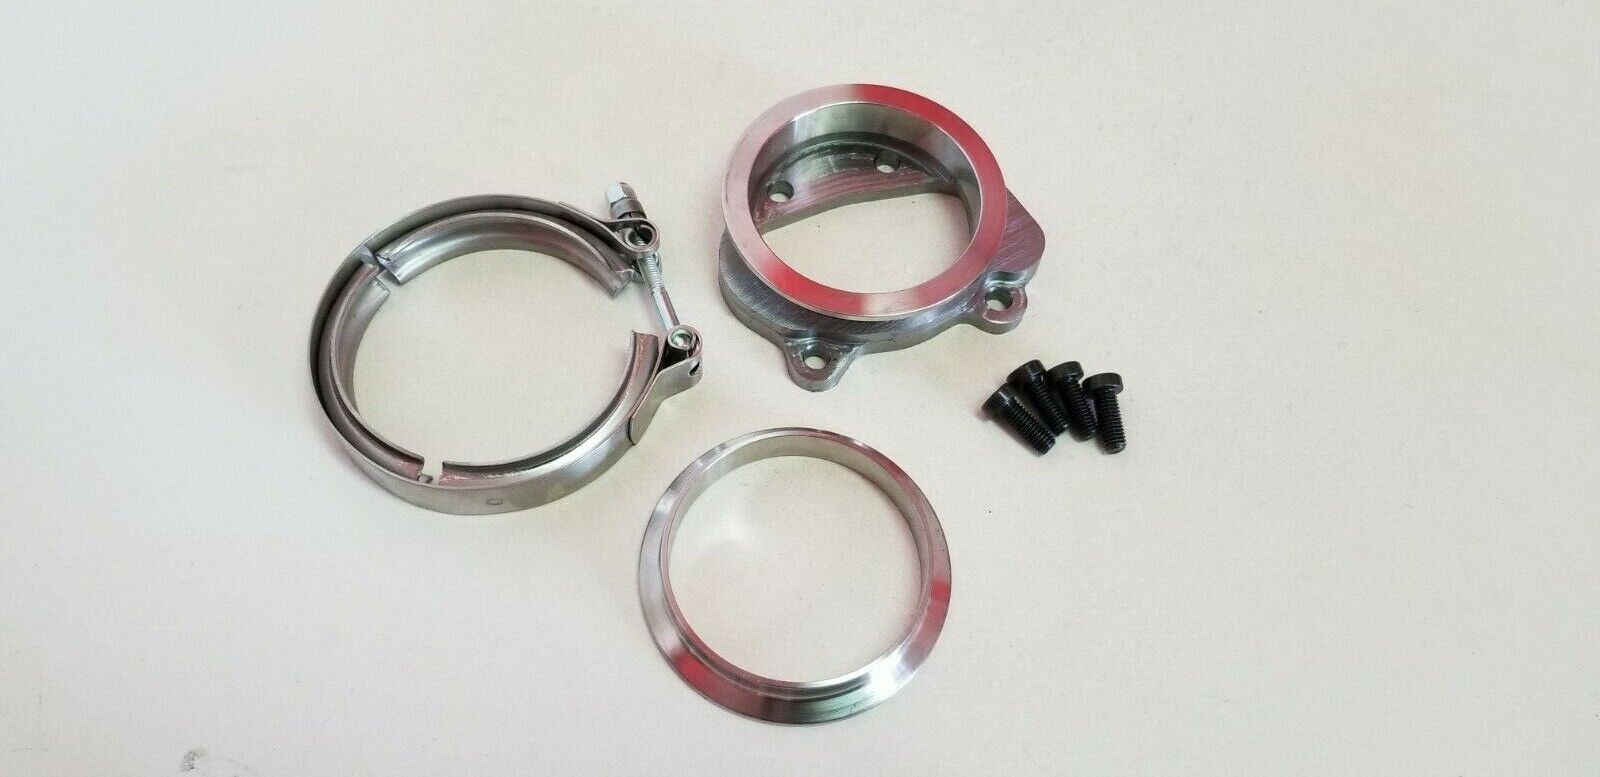 Downpipe Turbo Flange to 3.0 Vband Kit TB02 Z32 96-2000 Adapter Fit Nissan 300ZX